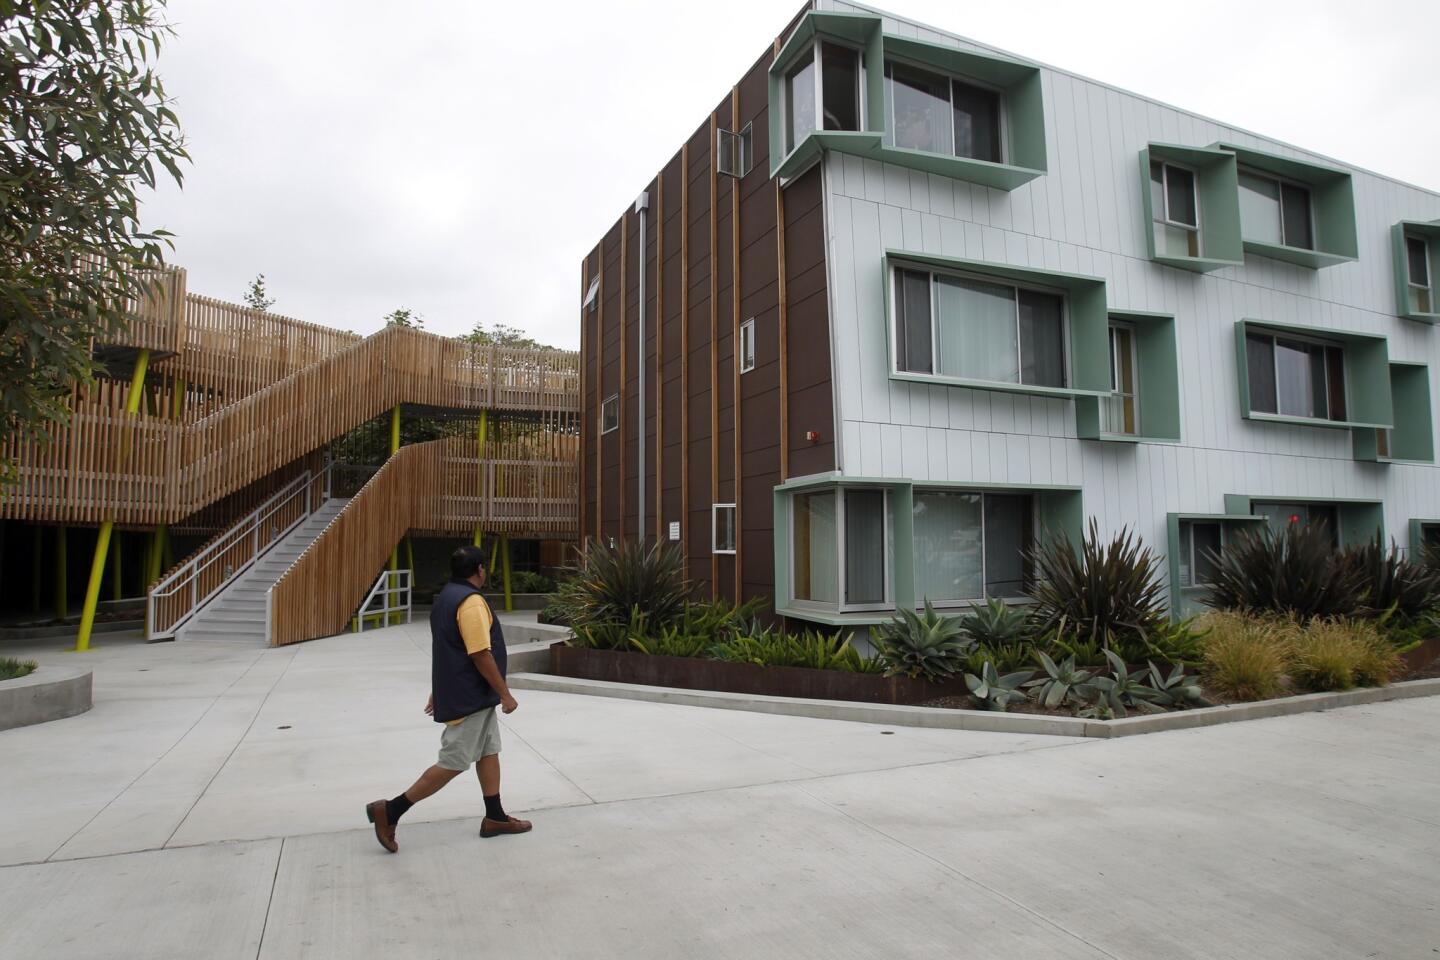 When creating this building, one of the goals of the Community Corp. of Santa Monica was to provide housing that both blends in with the neighborhood, but yet stands out in a beautiful way.